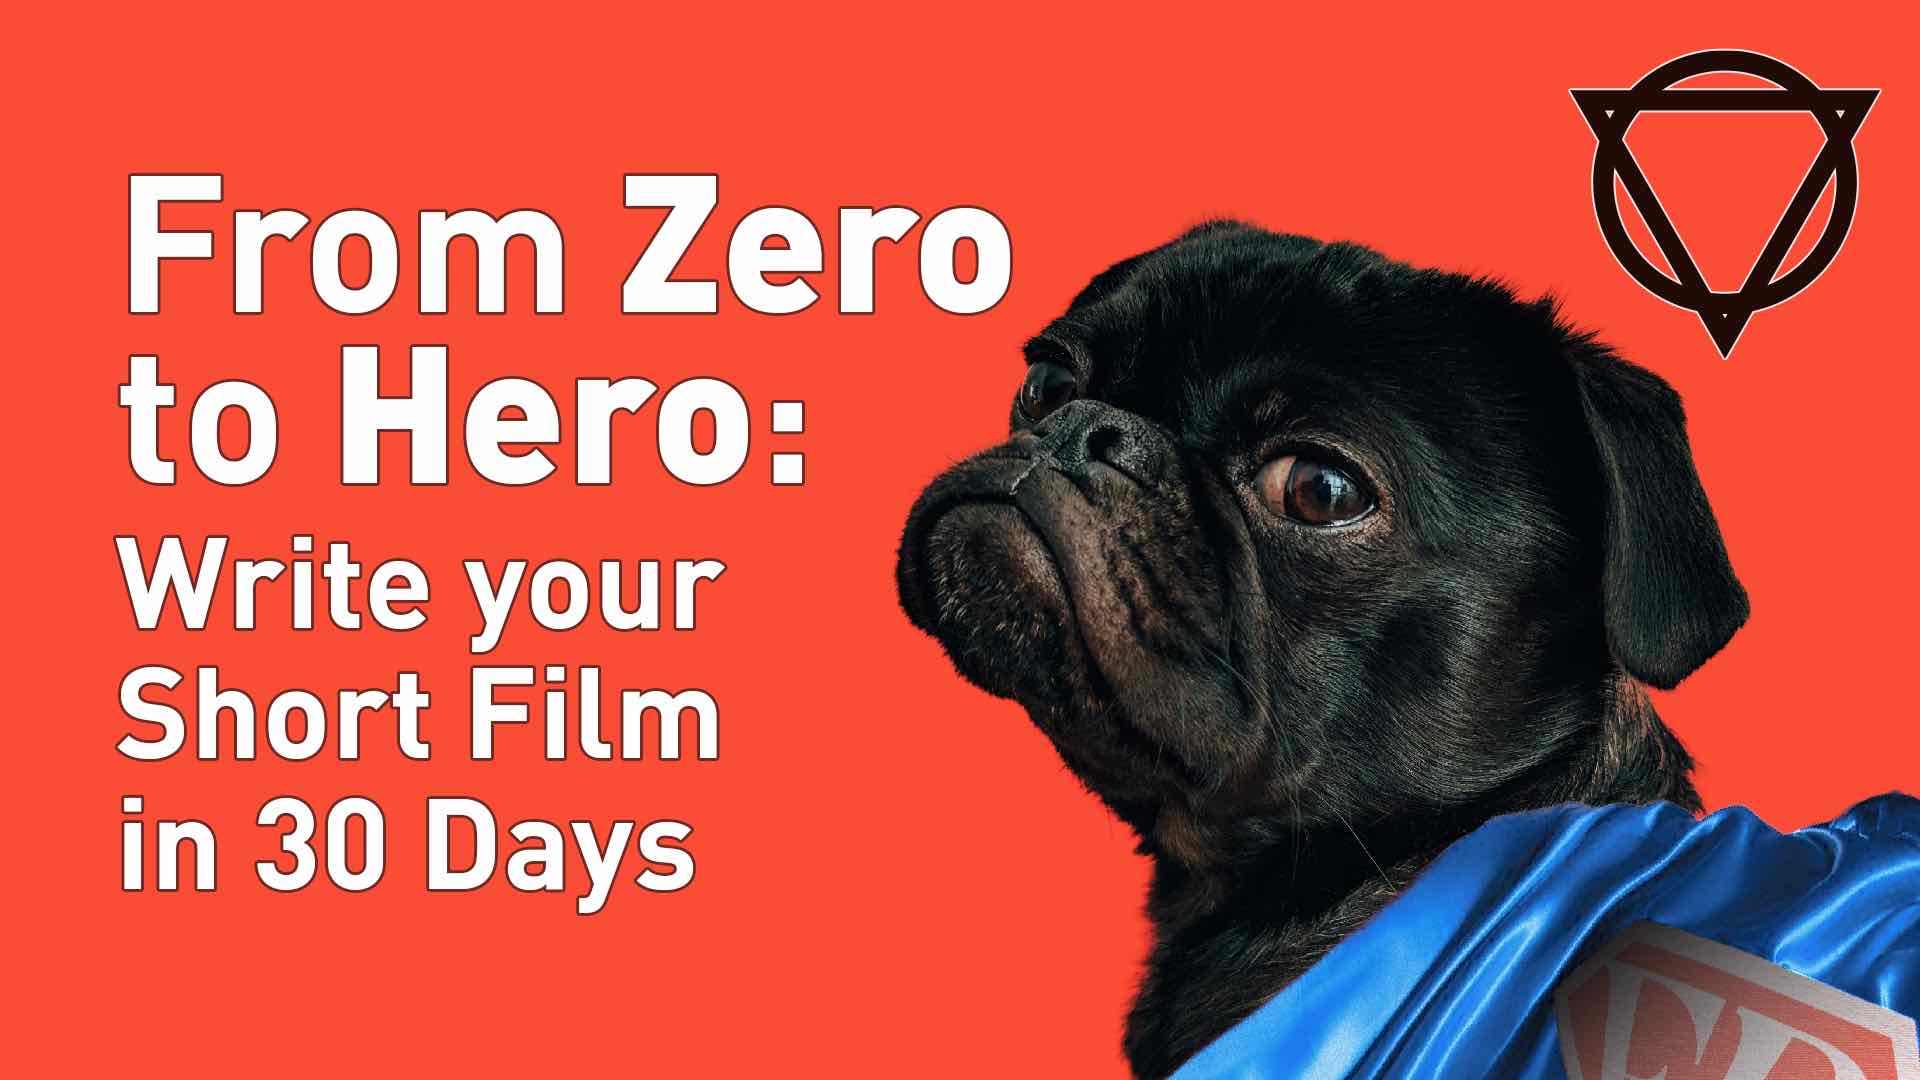 Do you dream of becoming a sensational writer? Stop dreaming and start screenwriting – go From Zero to Hero with our Write Your Short in 30 Days program.